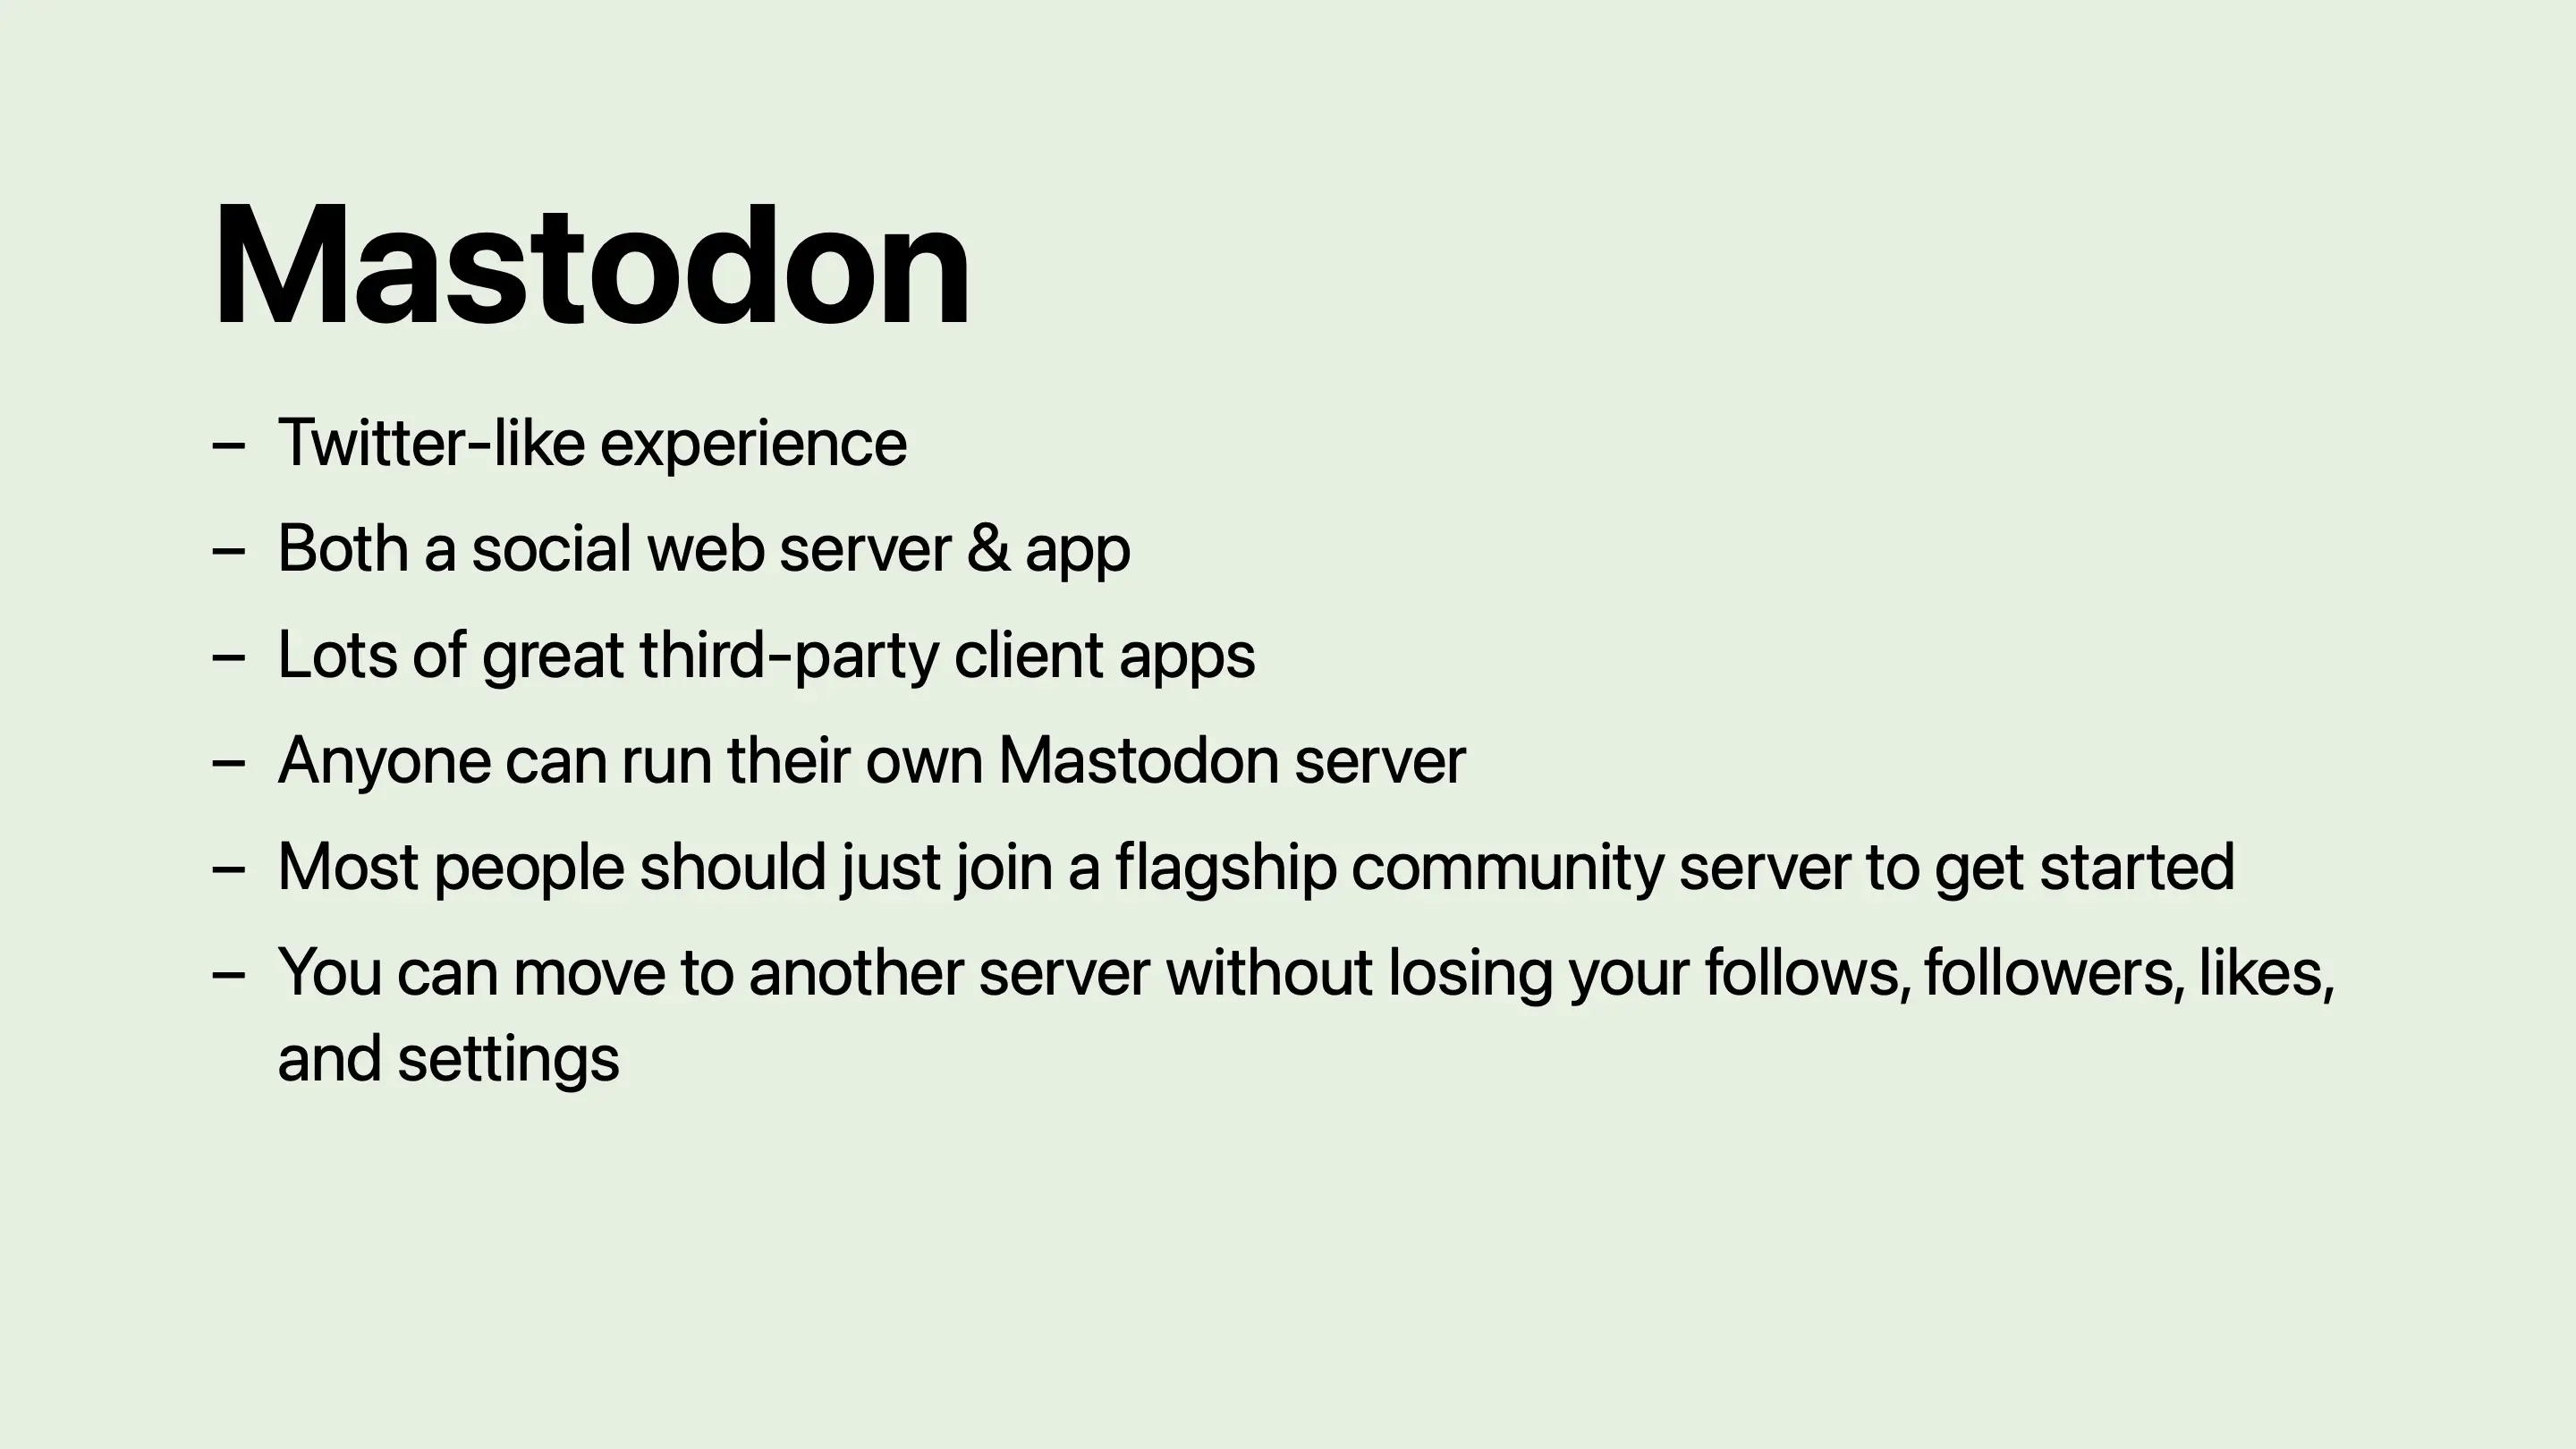 Mastodon: Twitter-like experience. Both a social web server and app. Lots of great third-party client apps. Anyone can run their own Mastodon server. Most people should just join a flagship community server to get started. You can move to another server without losing your follows, followers, likes, and settings.